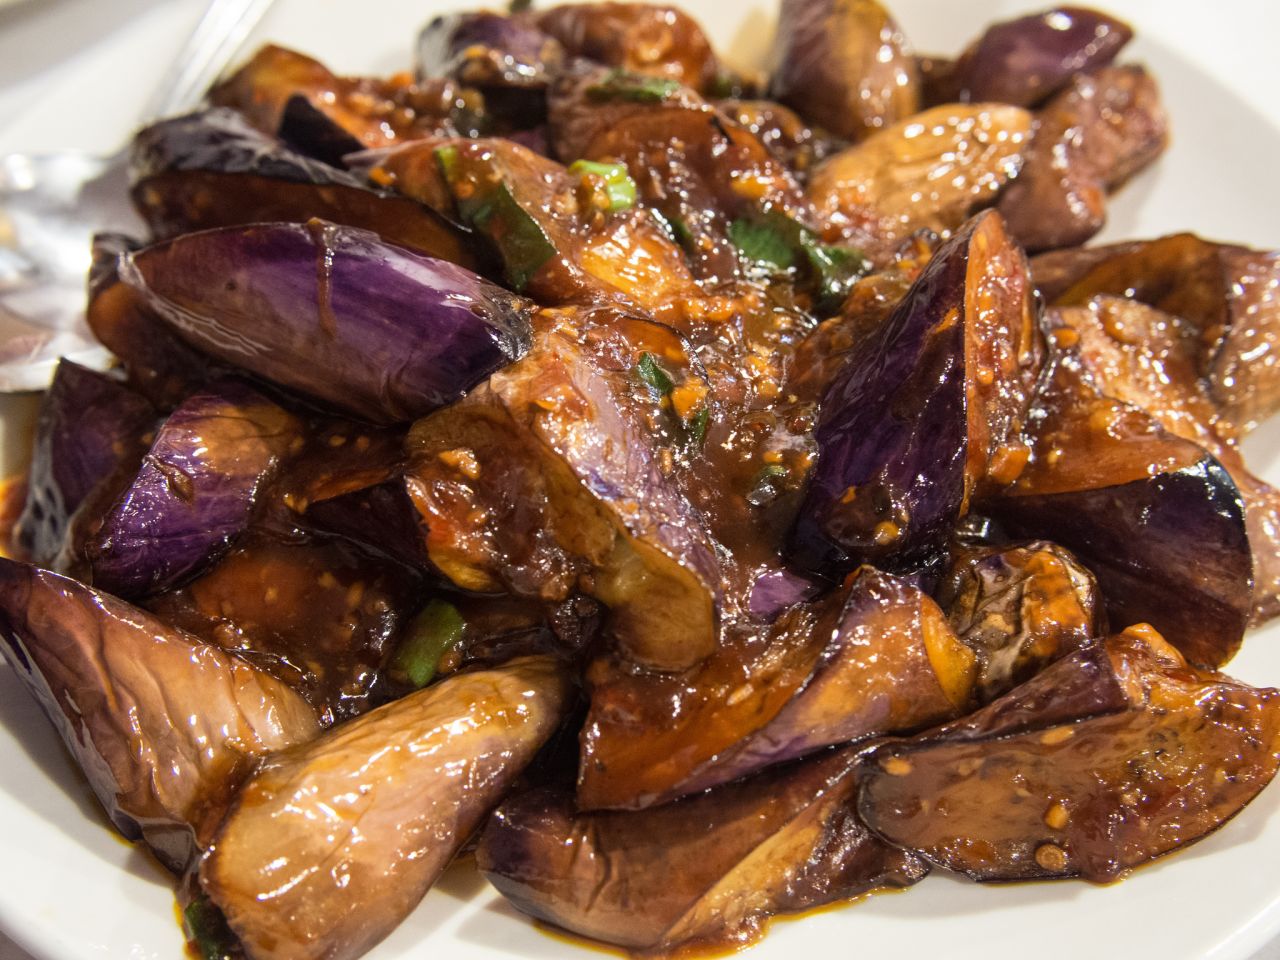 The meat dishes are great at Lao Sze Chuan, but this aubergine dish looks pretty tasty too.